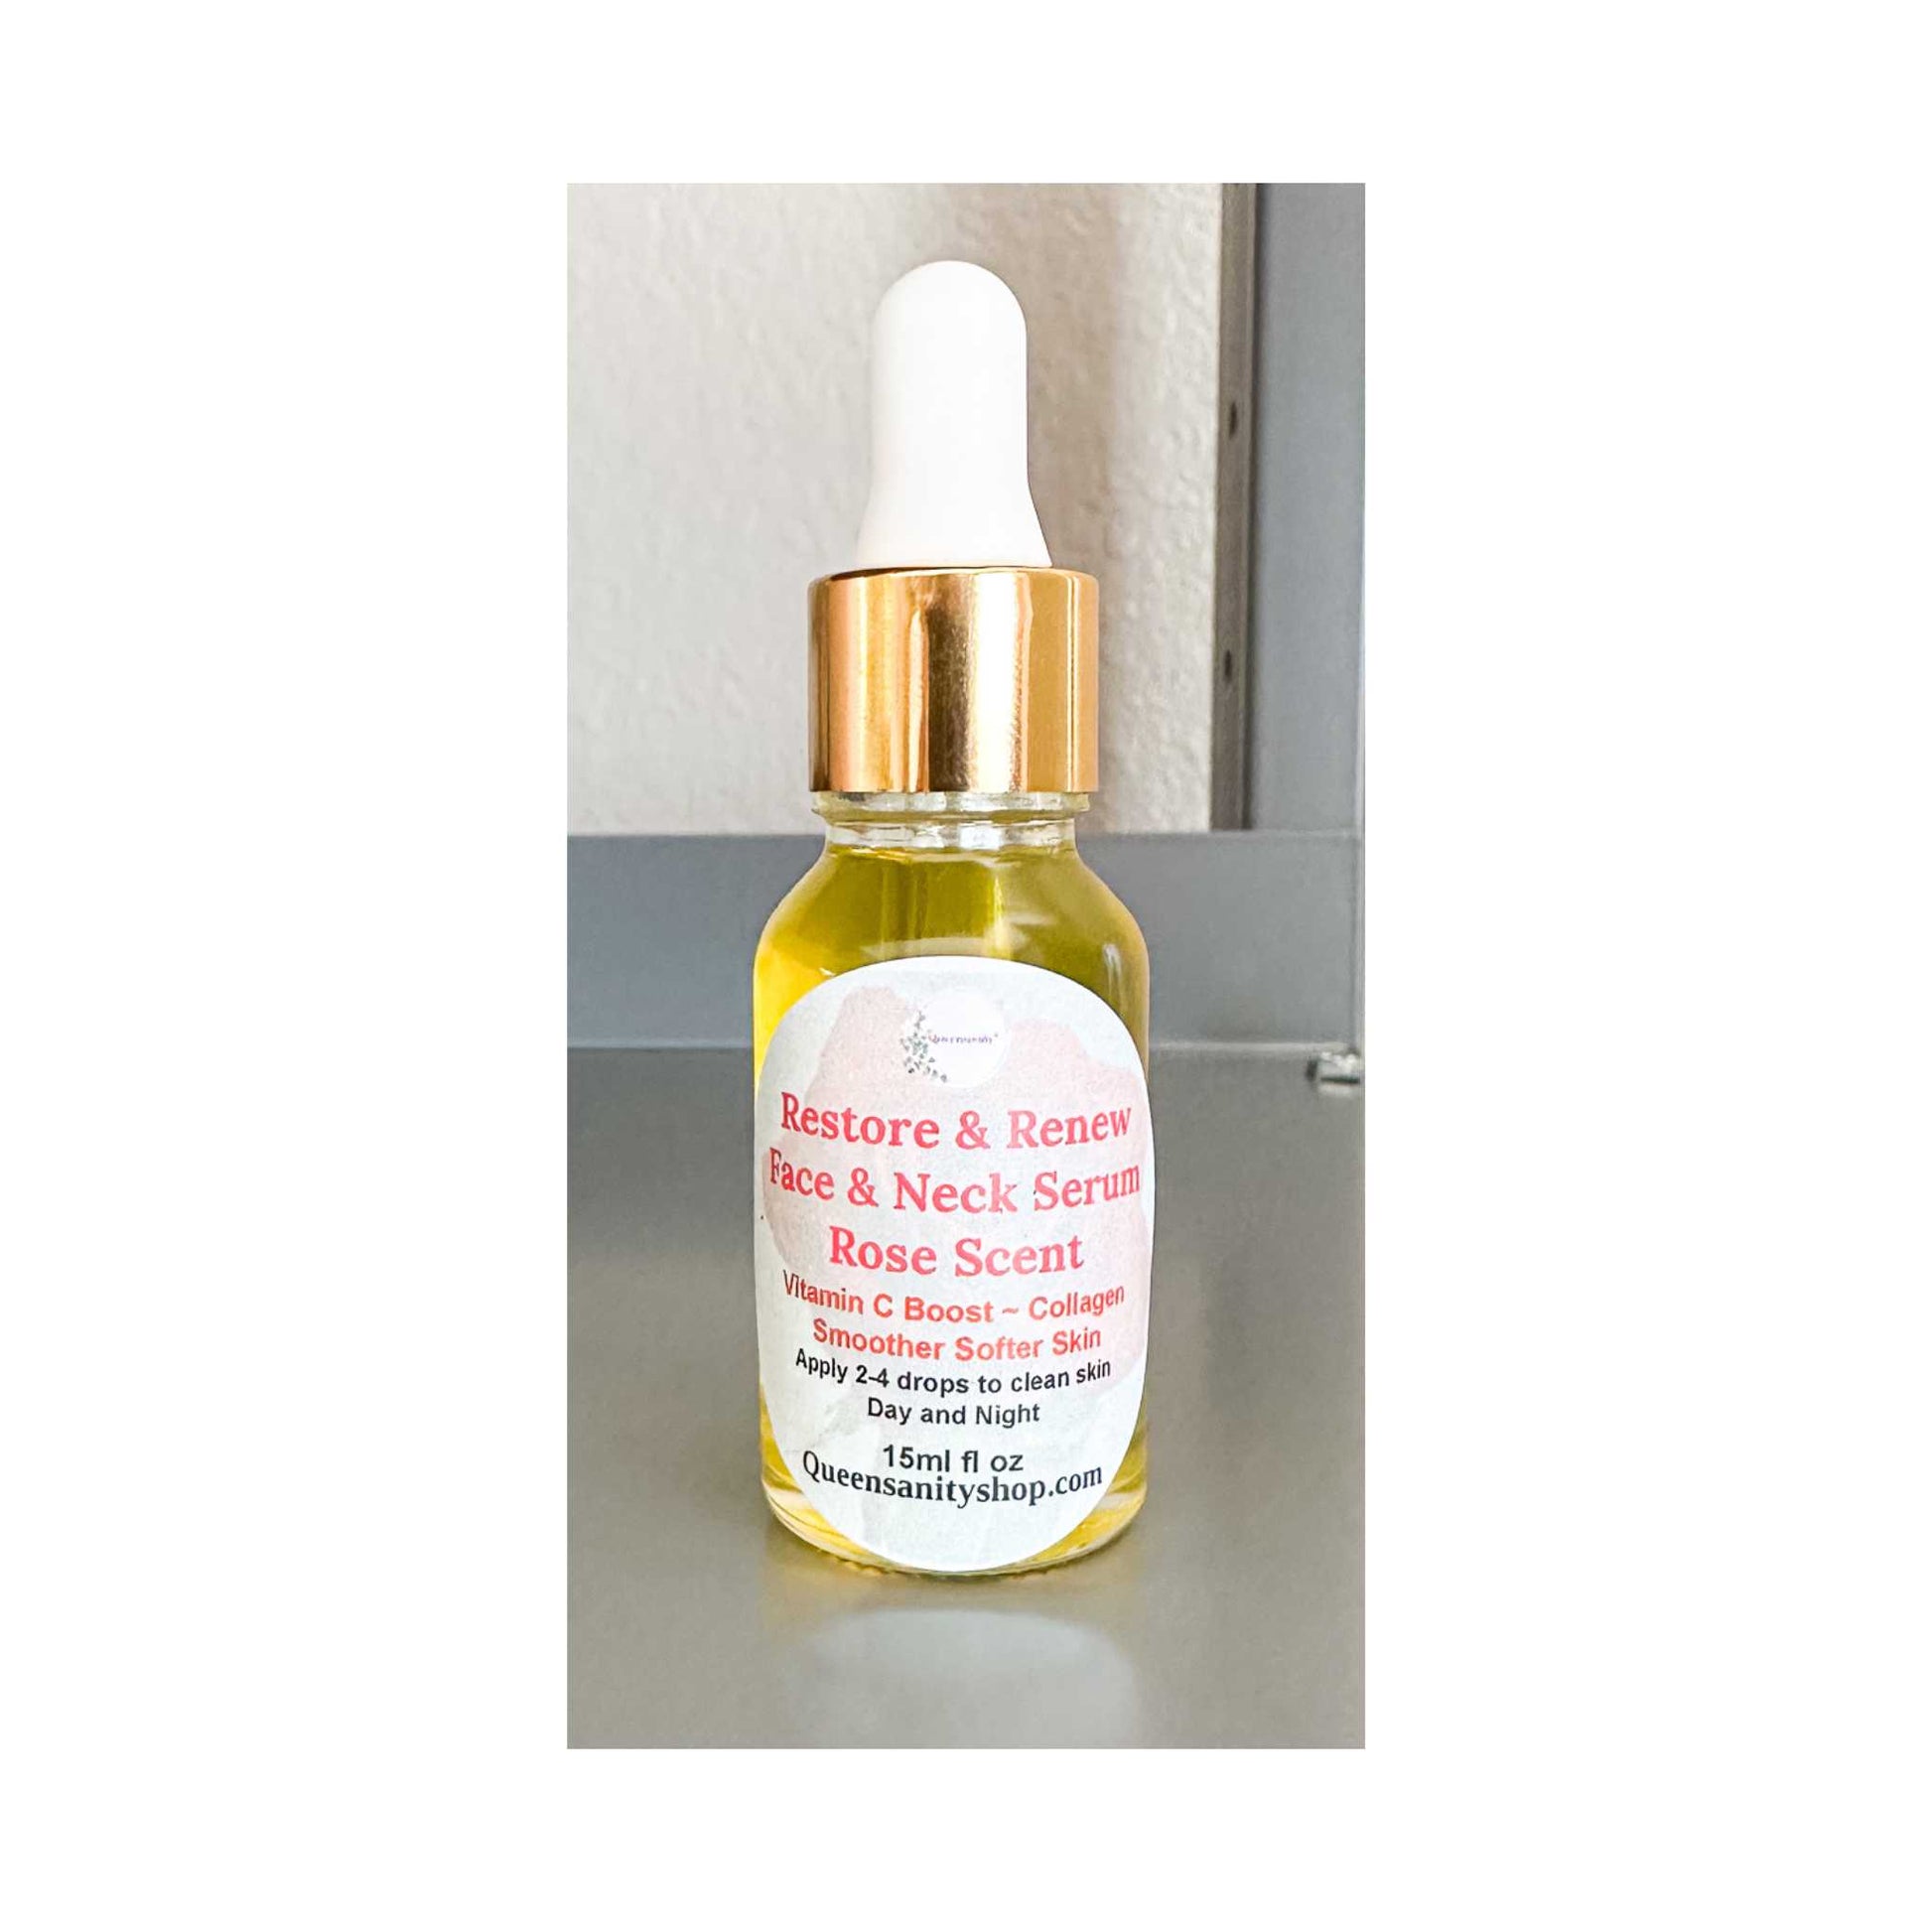 Spend $100 and get a FREE 15ml (1/2 oz) Restore and Renew Face Serum with visible Roses and Rose Scent.  *$100 BEFORE TAX. IF THE $100 IS NOT ADDED TO THE CART, YOU WILL NOT SEE THE FREE GIFT.  *We do not refund or send out extra or replace samples. 